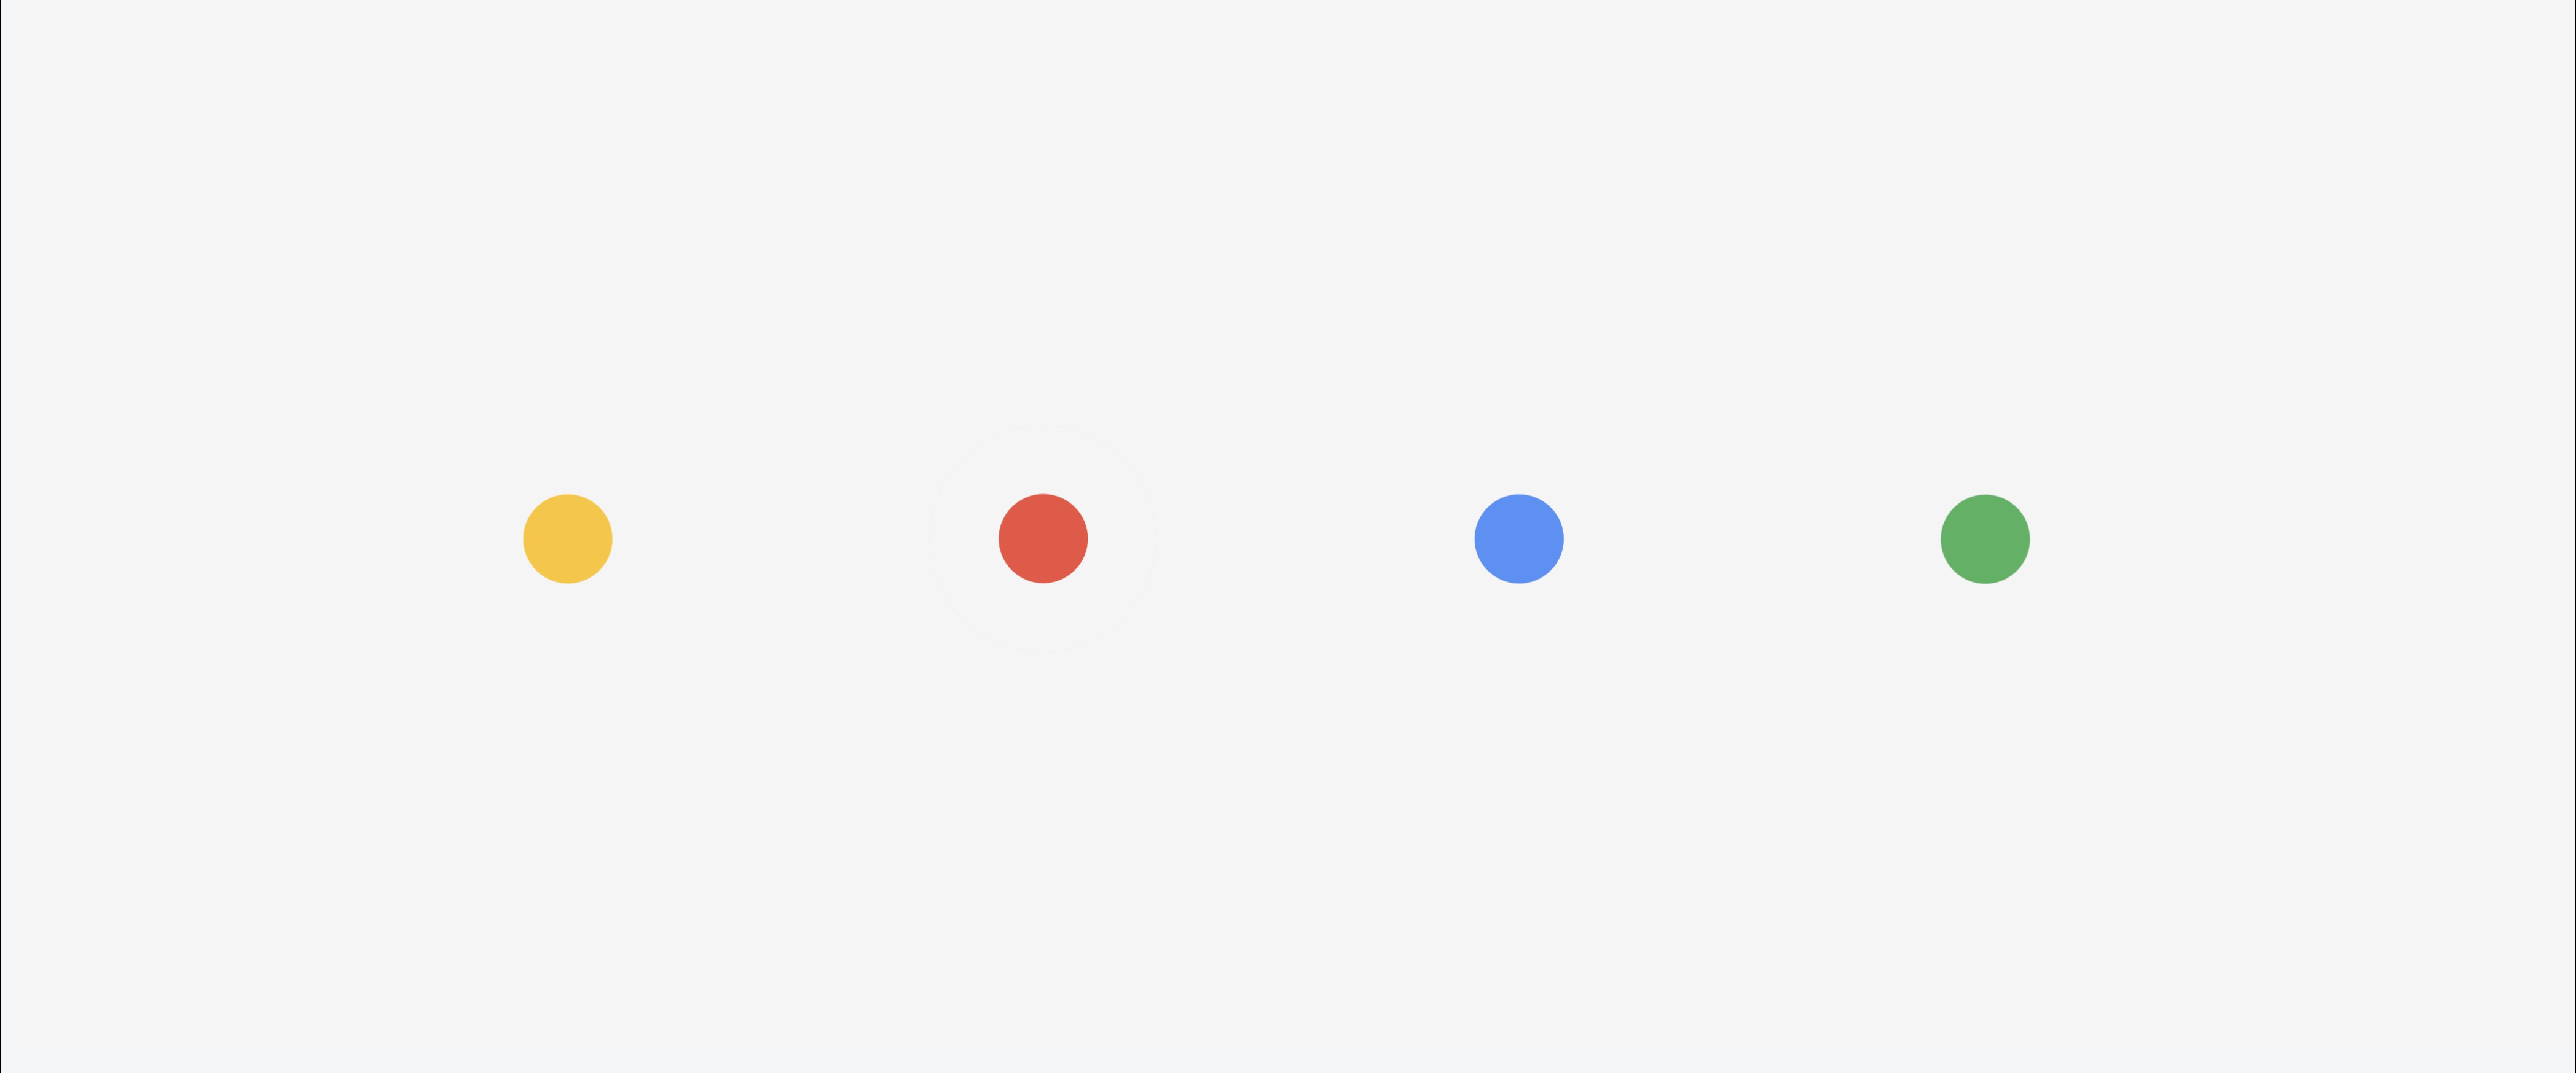 An abstract animated gif showing four dots - yellow, red, blue and green - each with a circle that starts out small around the dot and then gets bigger. The effect suggests vibration.